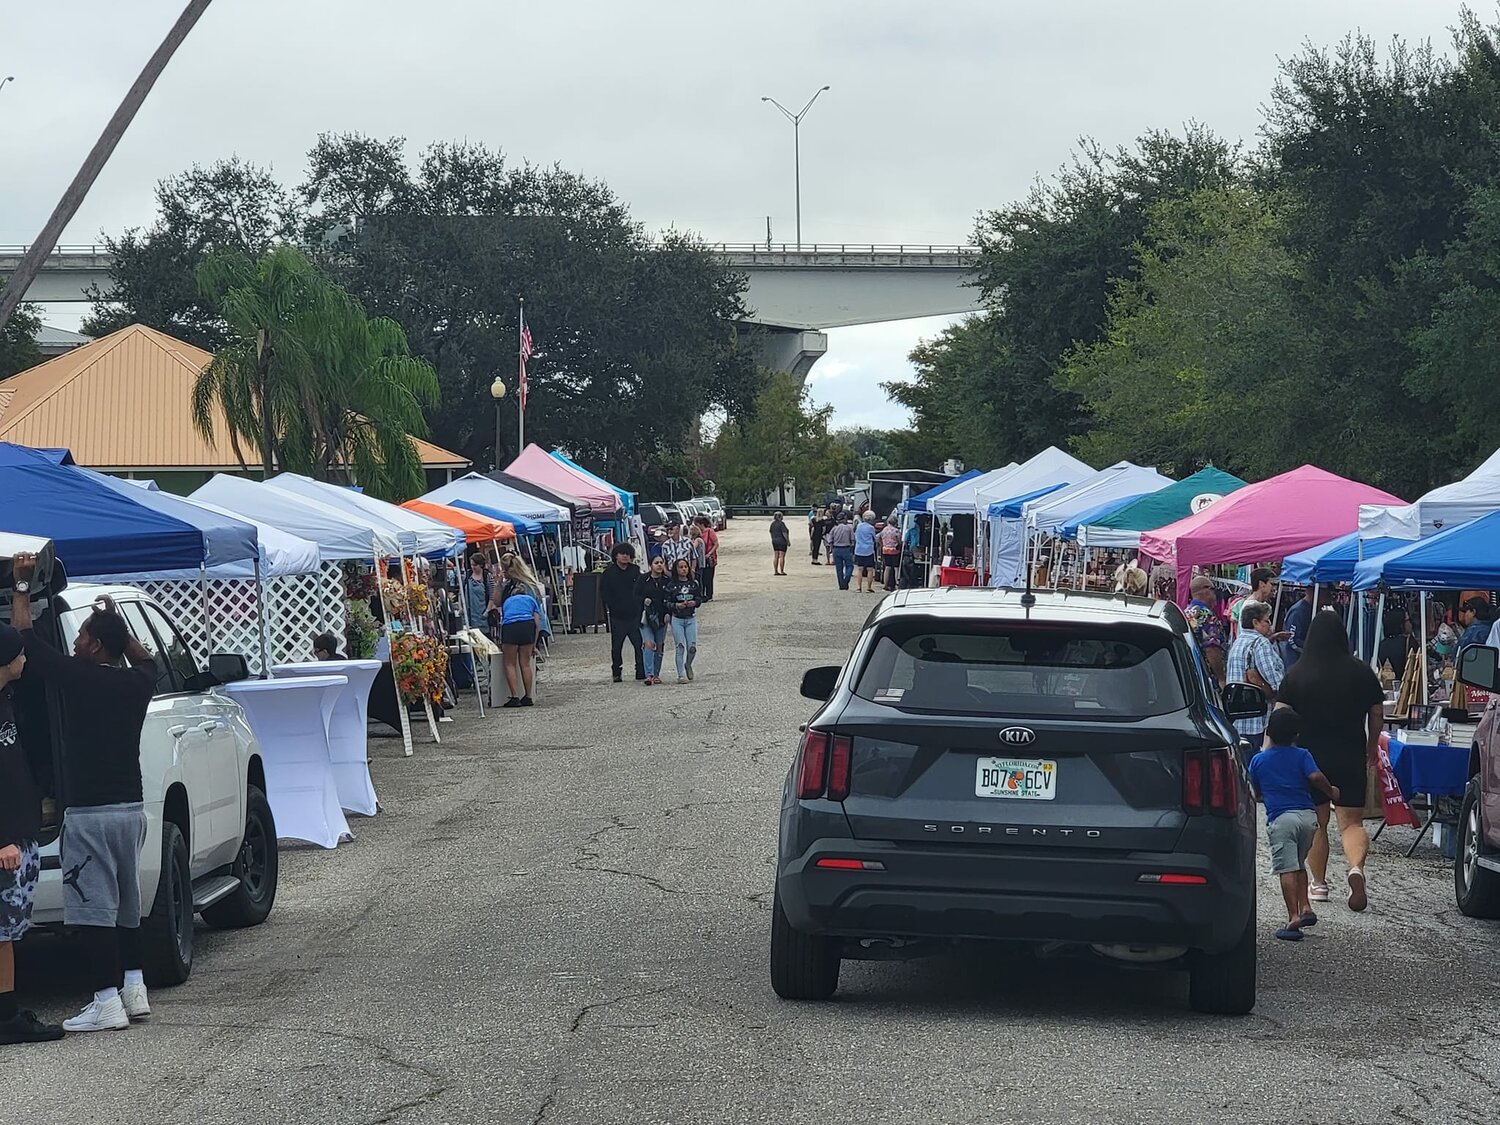 MOORE HAVEN – More than 40 vendors participated in the Riverside Market on Nov. 18, offering a variety of foods, crafts and more. Riverside Market will be held once a month at 299 Riverside Drive in Moore Haven from 9 a.m. to 1 p.m. through April. The next market will be held Dec. 16.